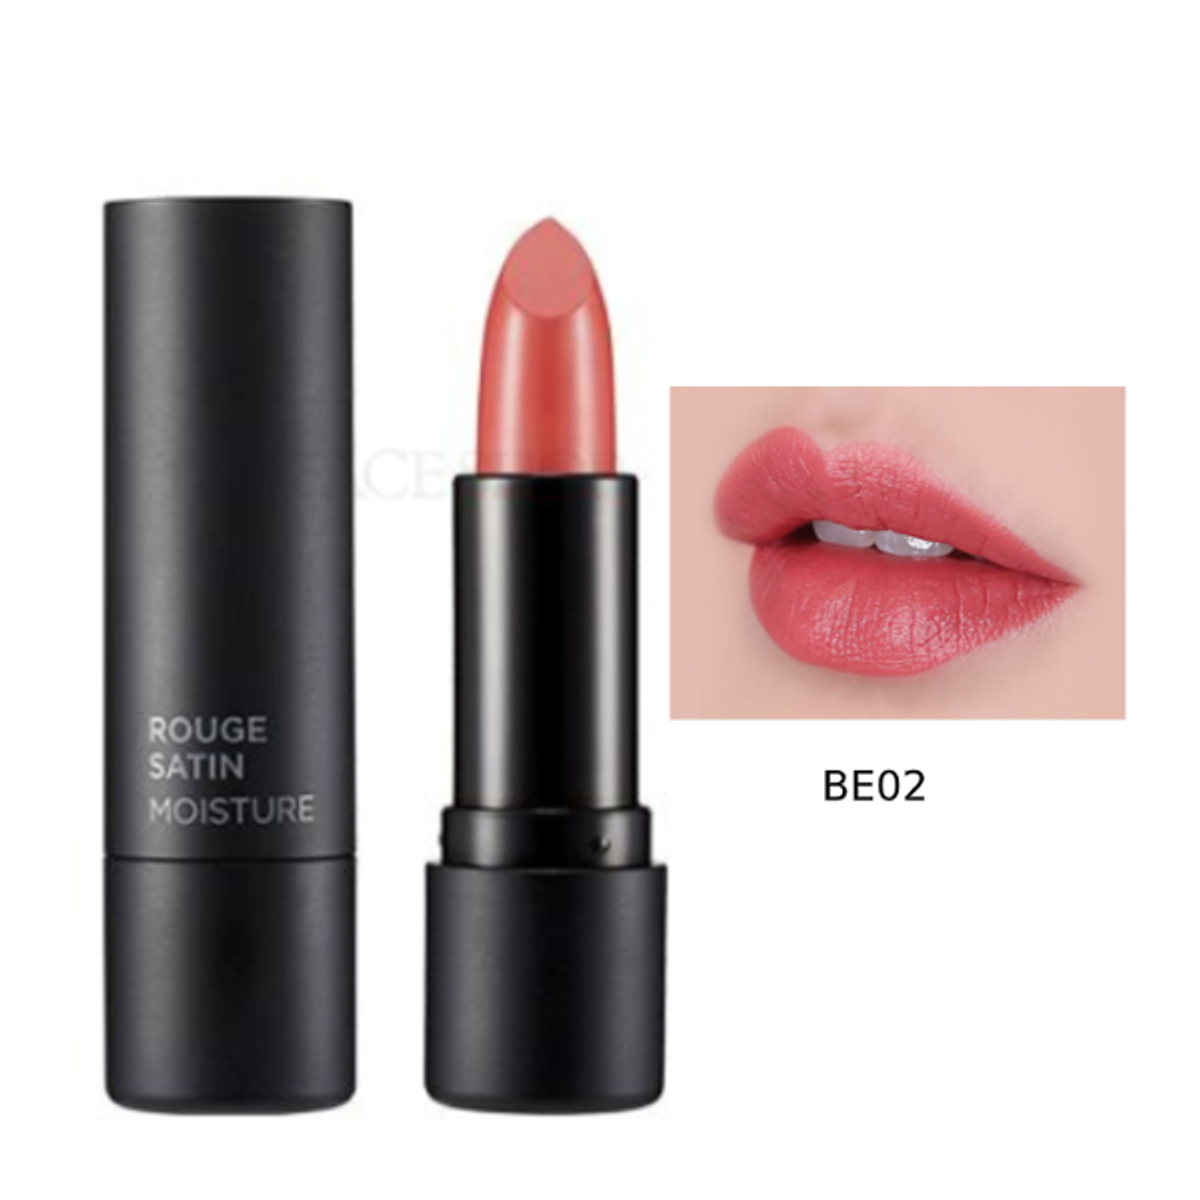 gift-fmgt-son-thoi-duong-am-rouge-satin-moisture-be02-blush-beige-3-6g-1